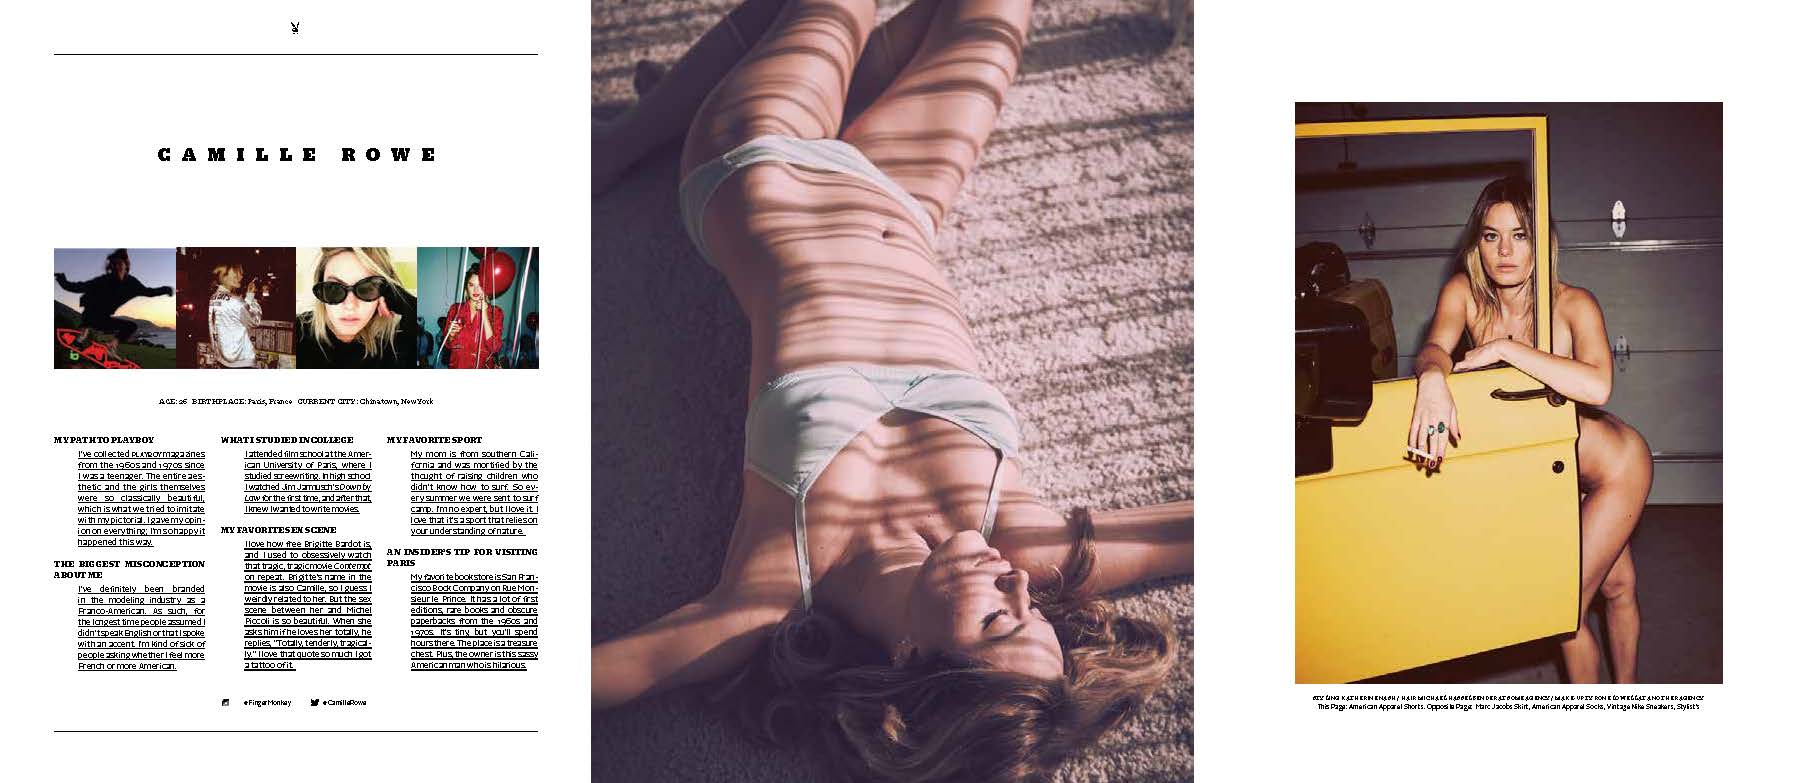  | Playboy March / April Issues | 34